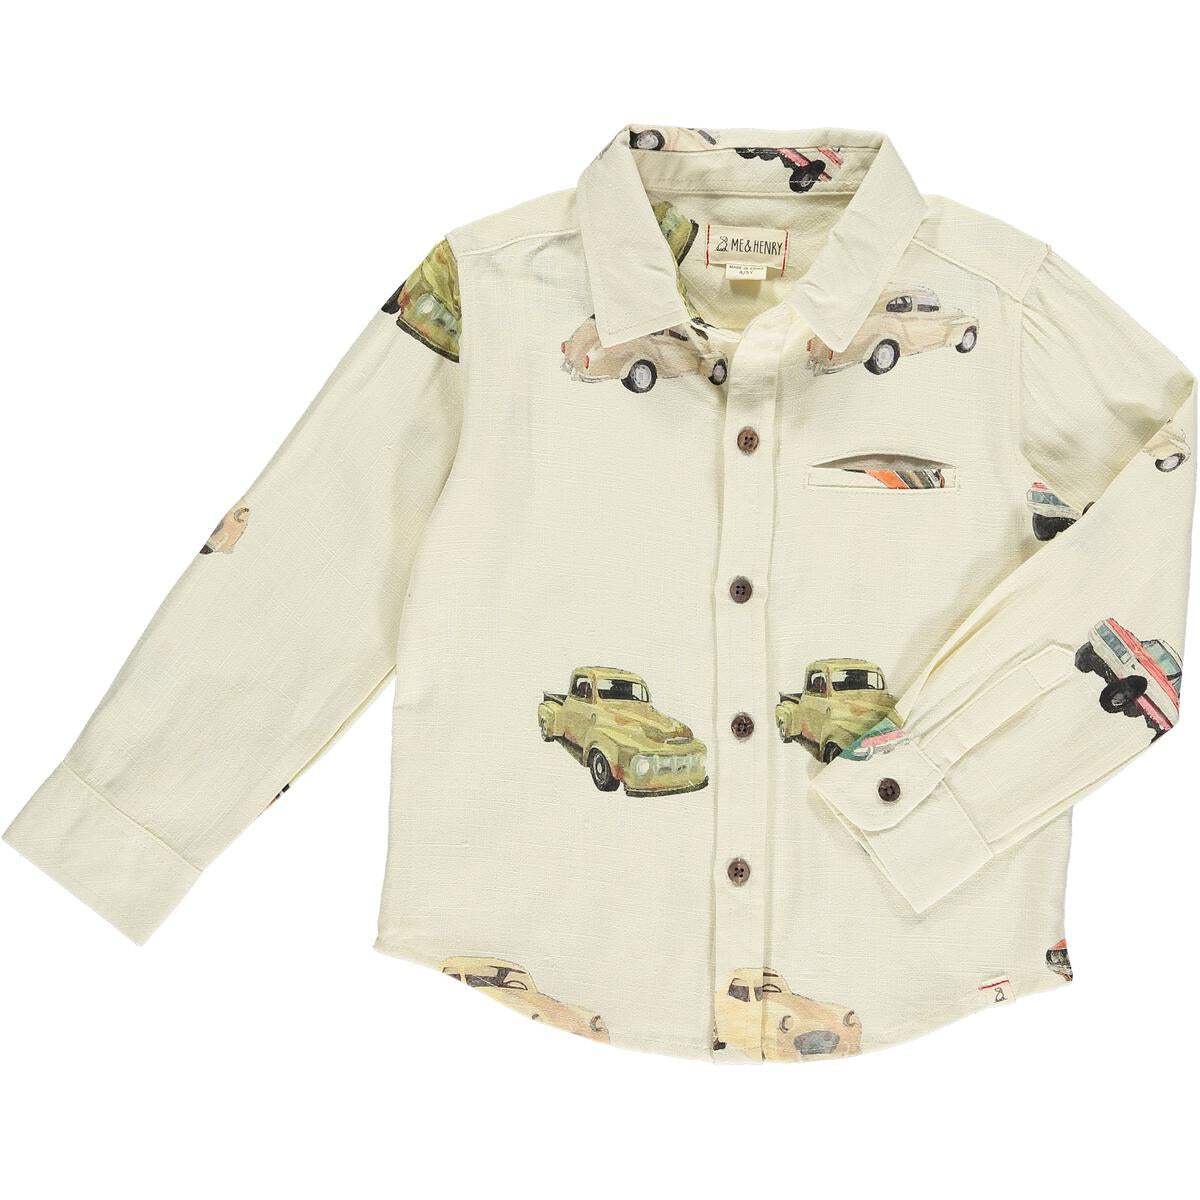 Atwood Woven Shirt. This classic long sleeve button-down is made unique with a vintage printed car design. An essential piece for any wardrobe.